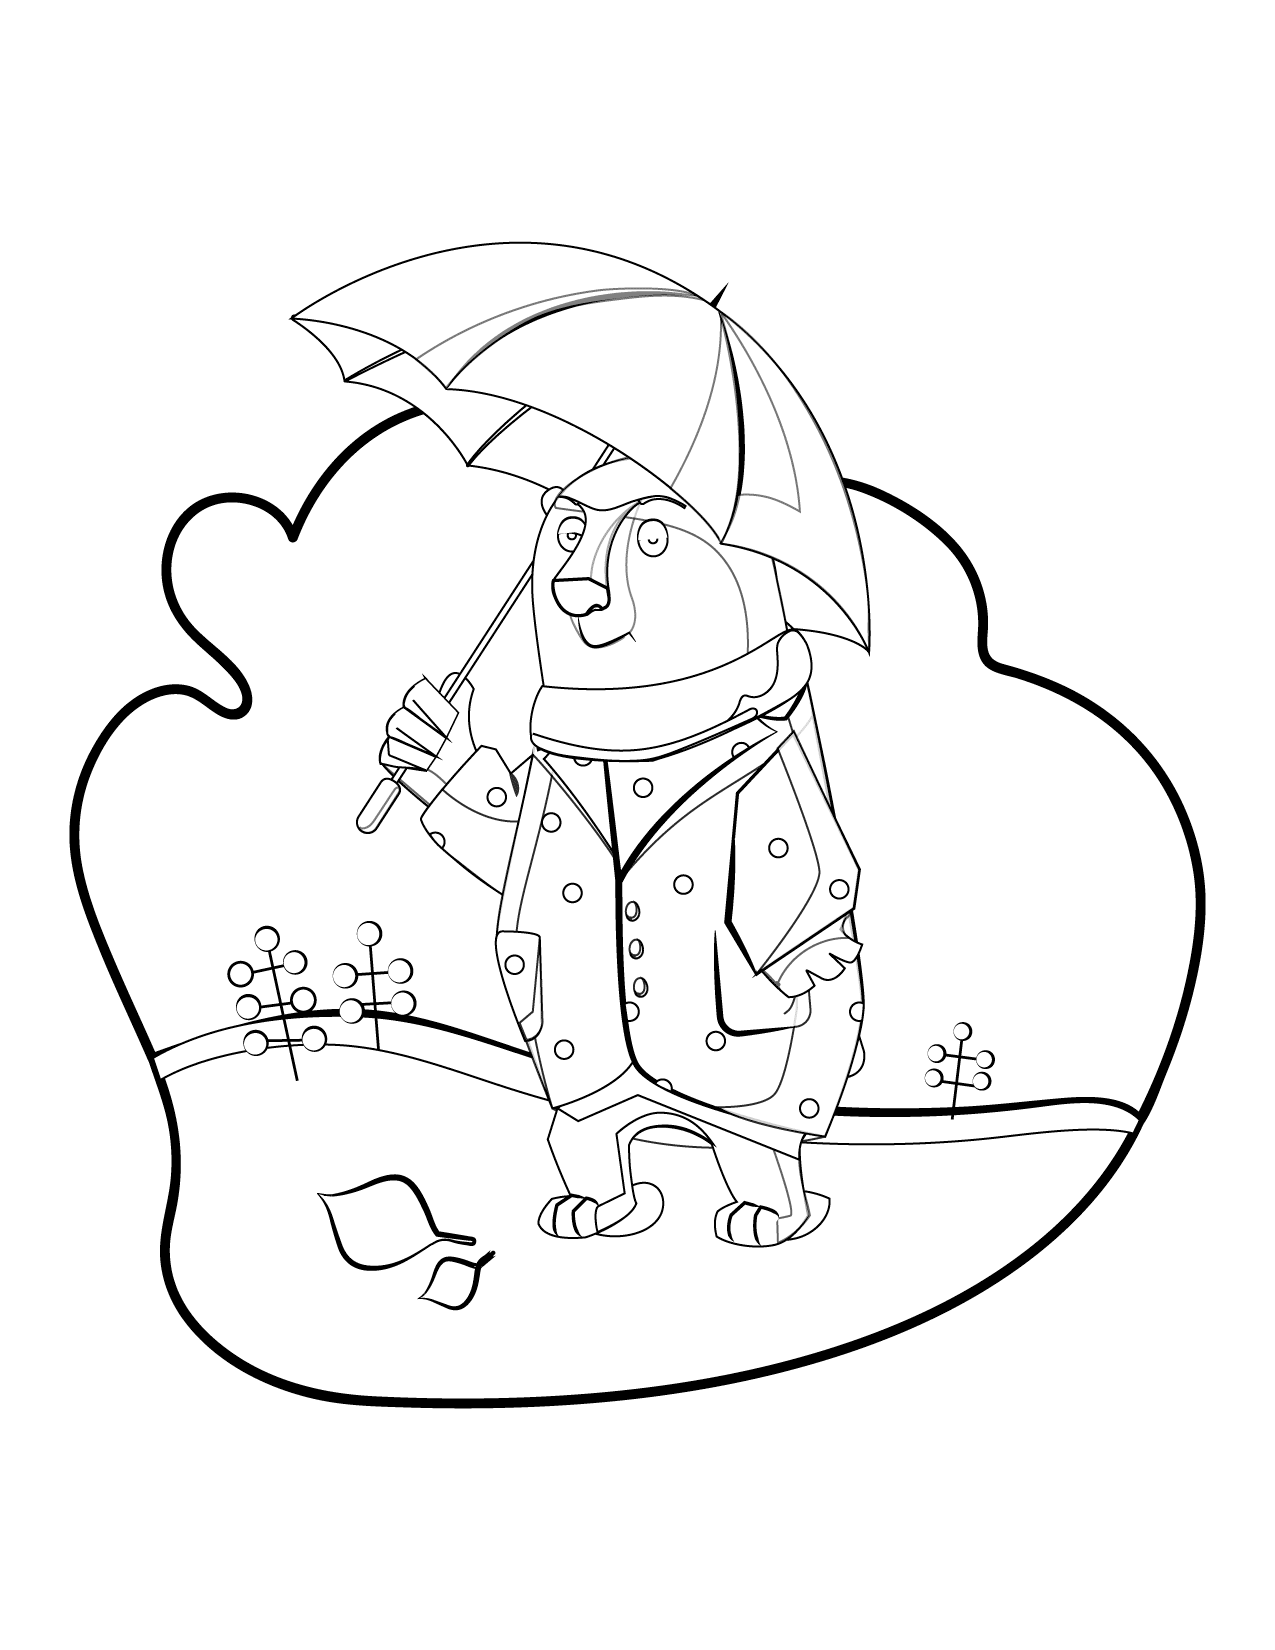 Bear With Umbrella In The Rain Coloring Page